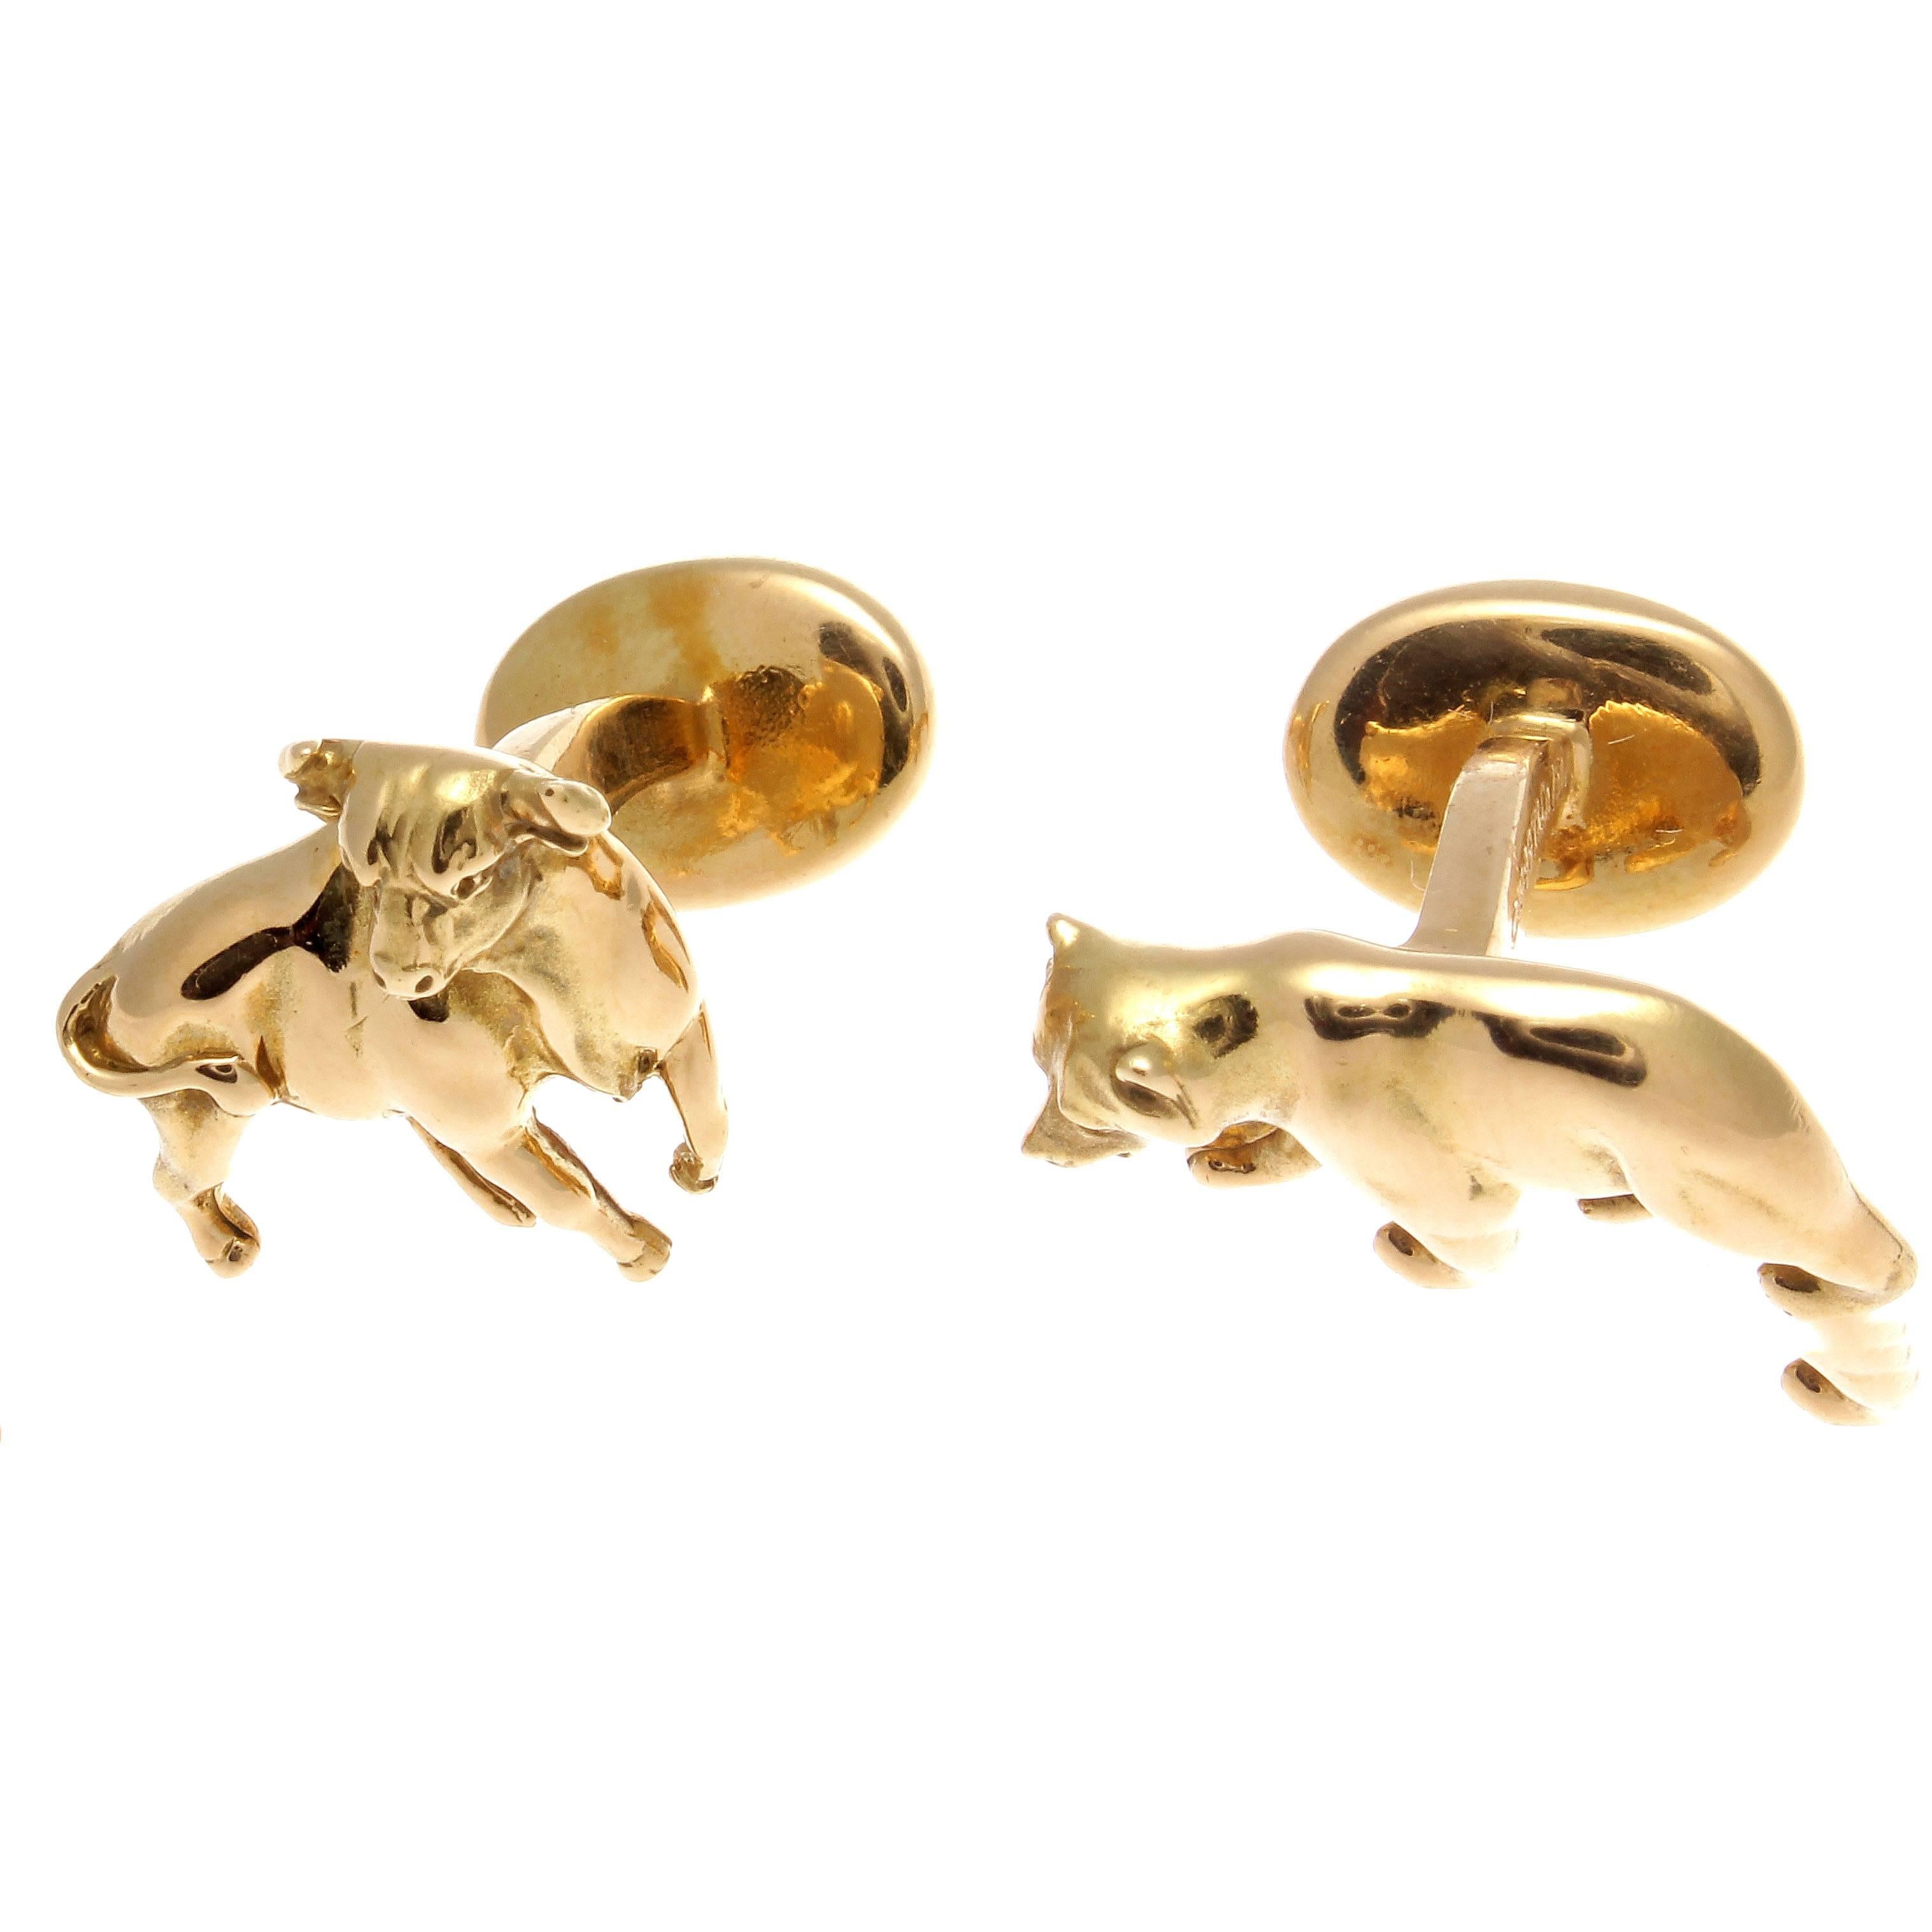 The two infamous animals people love and hate on Wall Street. Replicated in glistening 18k yellow gold by Tiffany & Co.